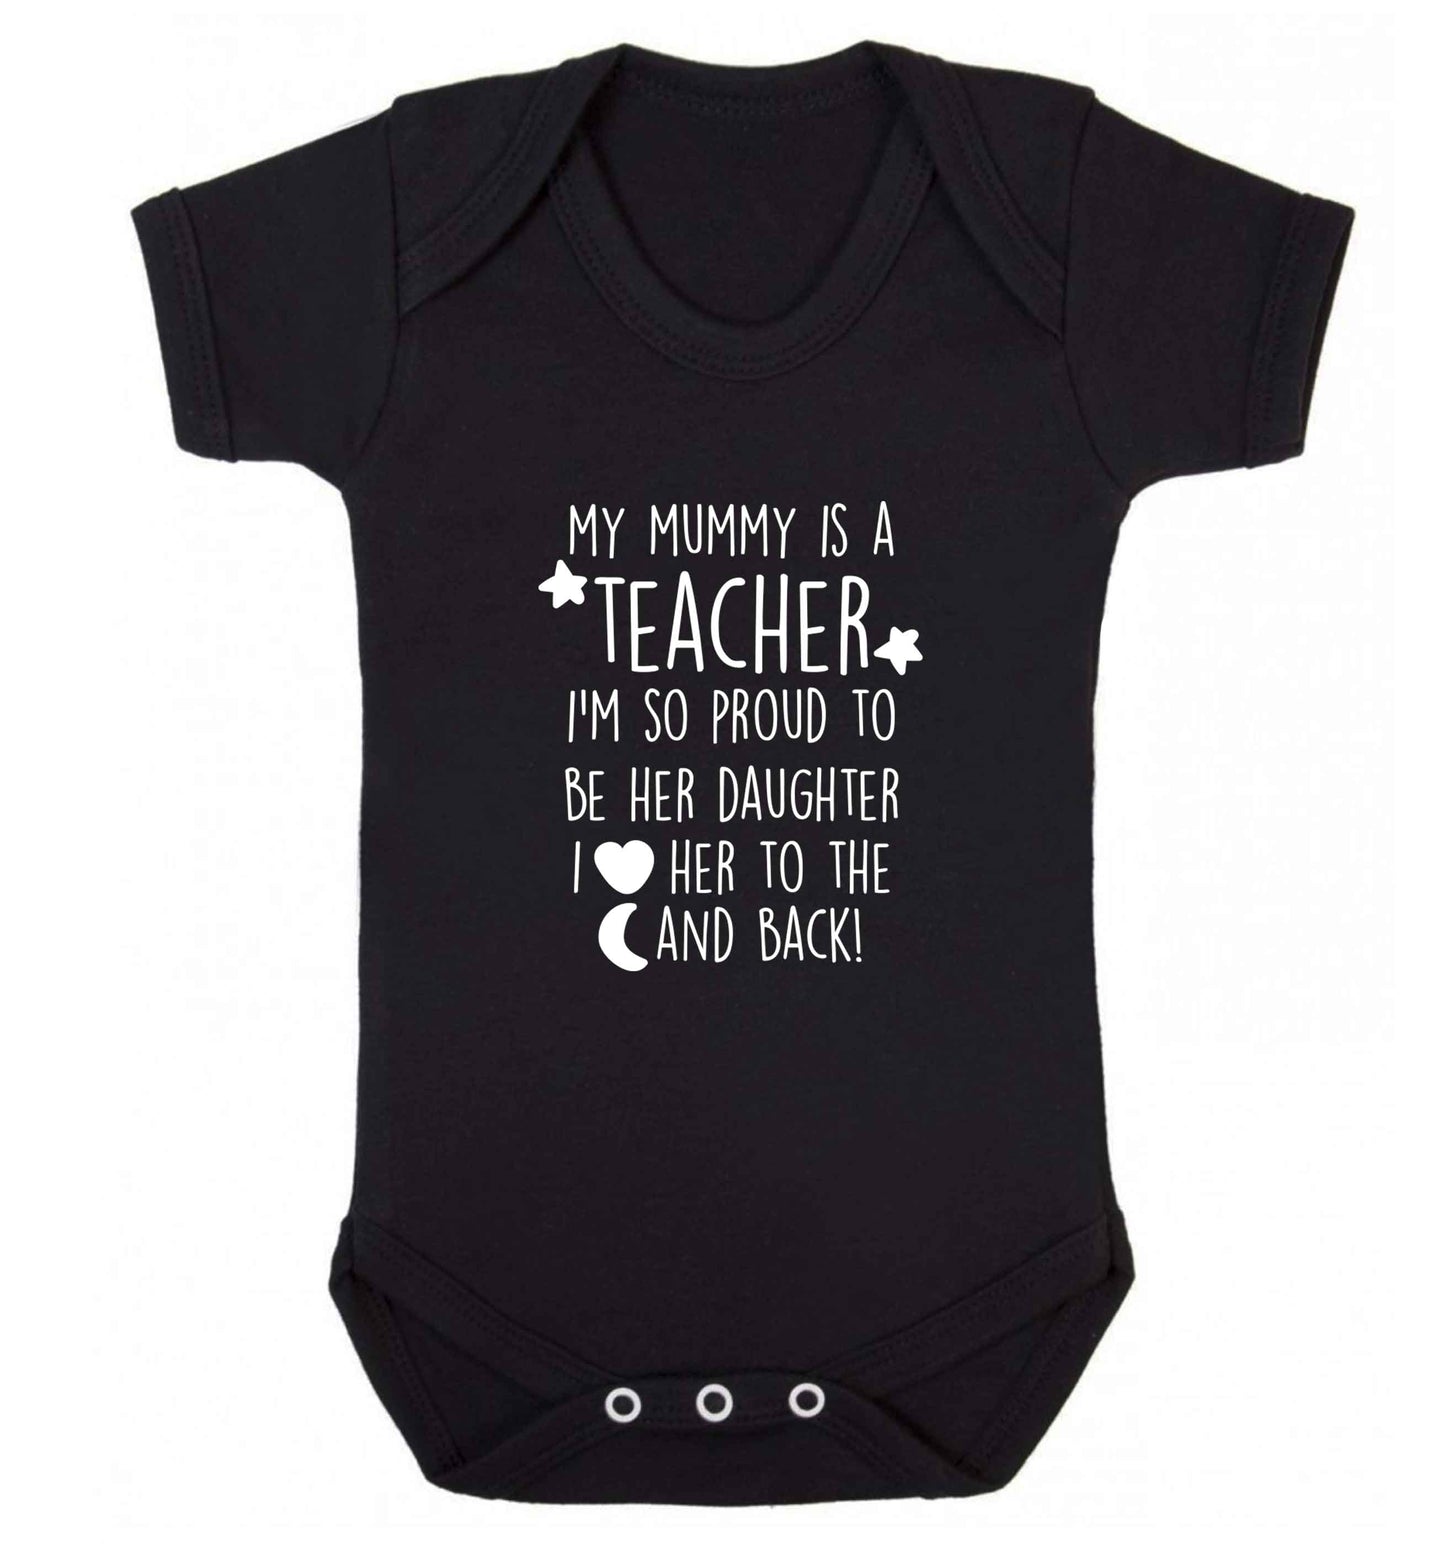 My mummy is a teacher I'm so proud to be her daughter I love her to the moon and back baby vest black 18-24 months